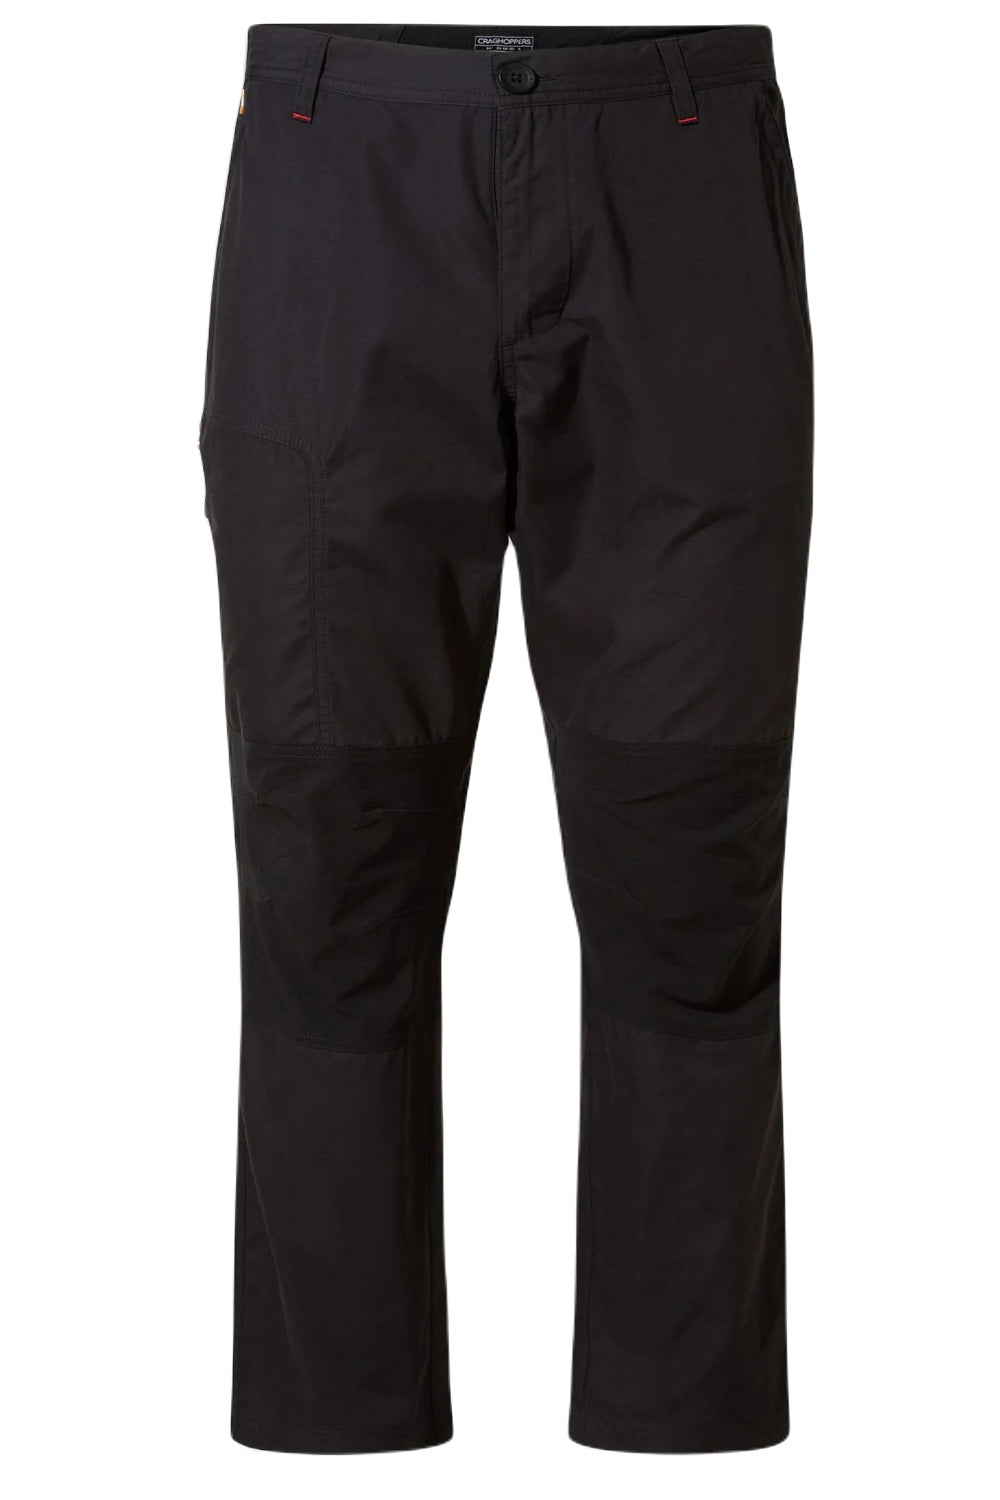 Craghoppers Verve Trousers in Black